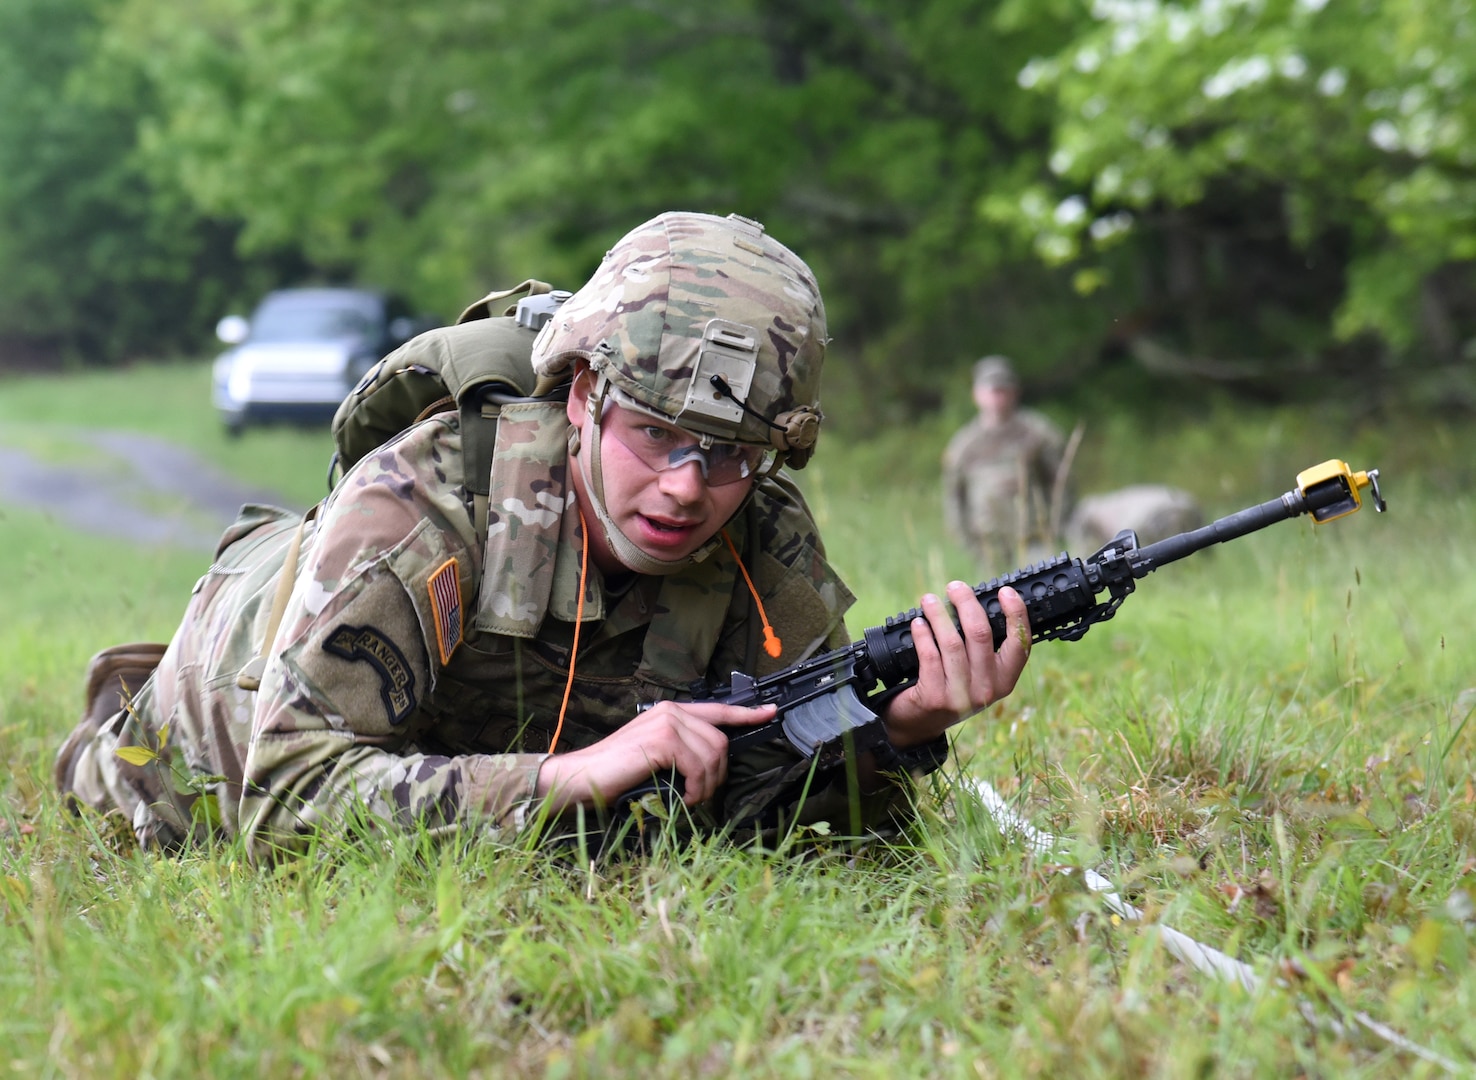 VNG Soldiers compete for Regional Best Warrior title